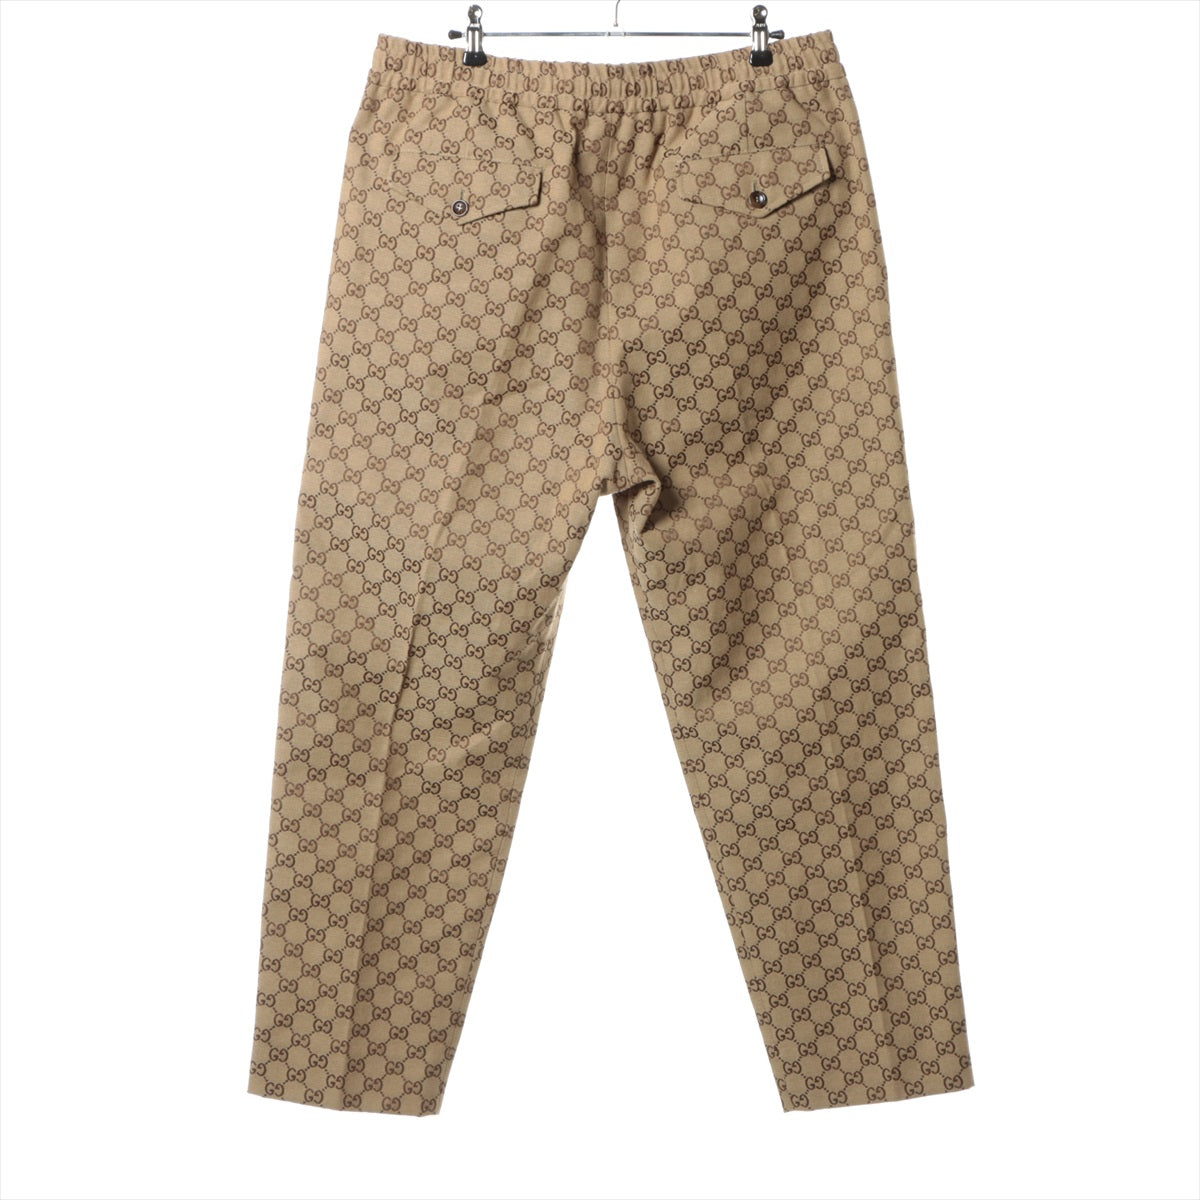 Gucci GG Canvas 19AW Cotton & polyester Pants 52 Men's Beige  569769